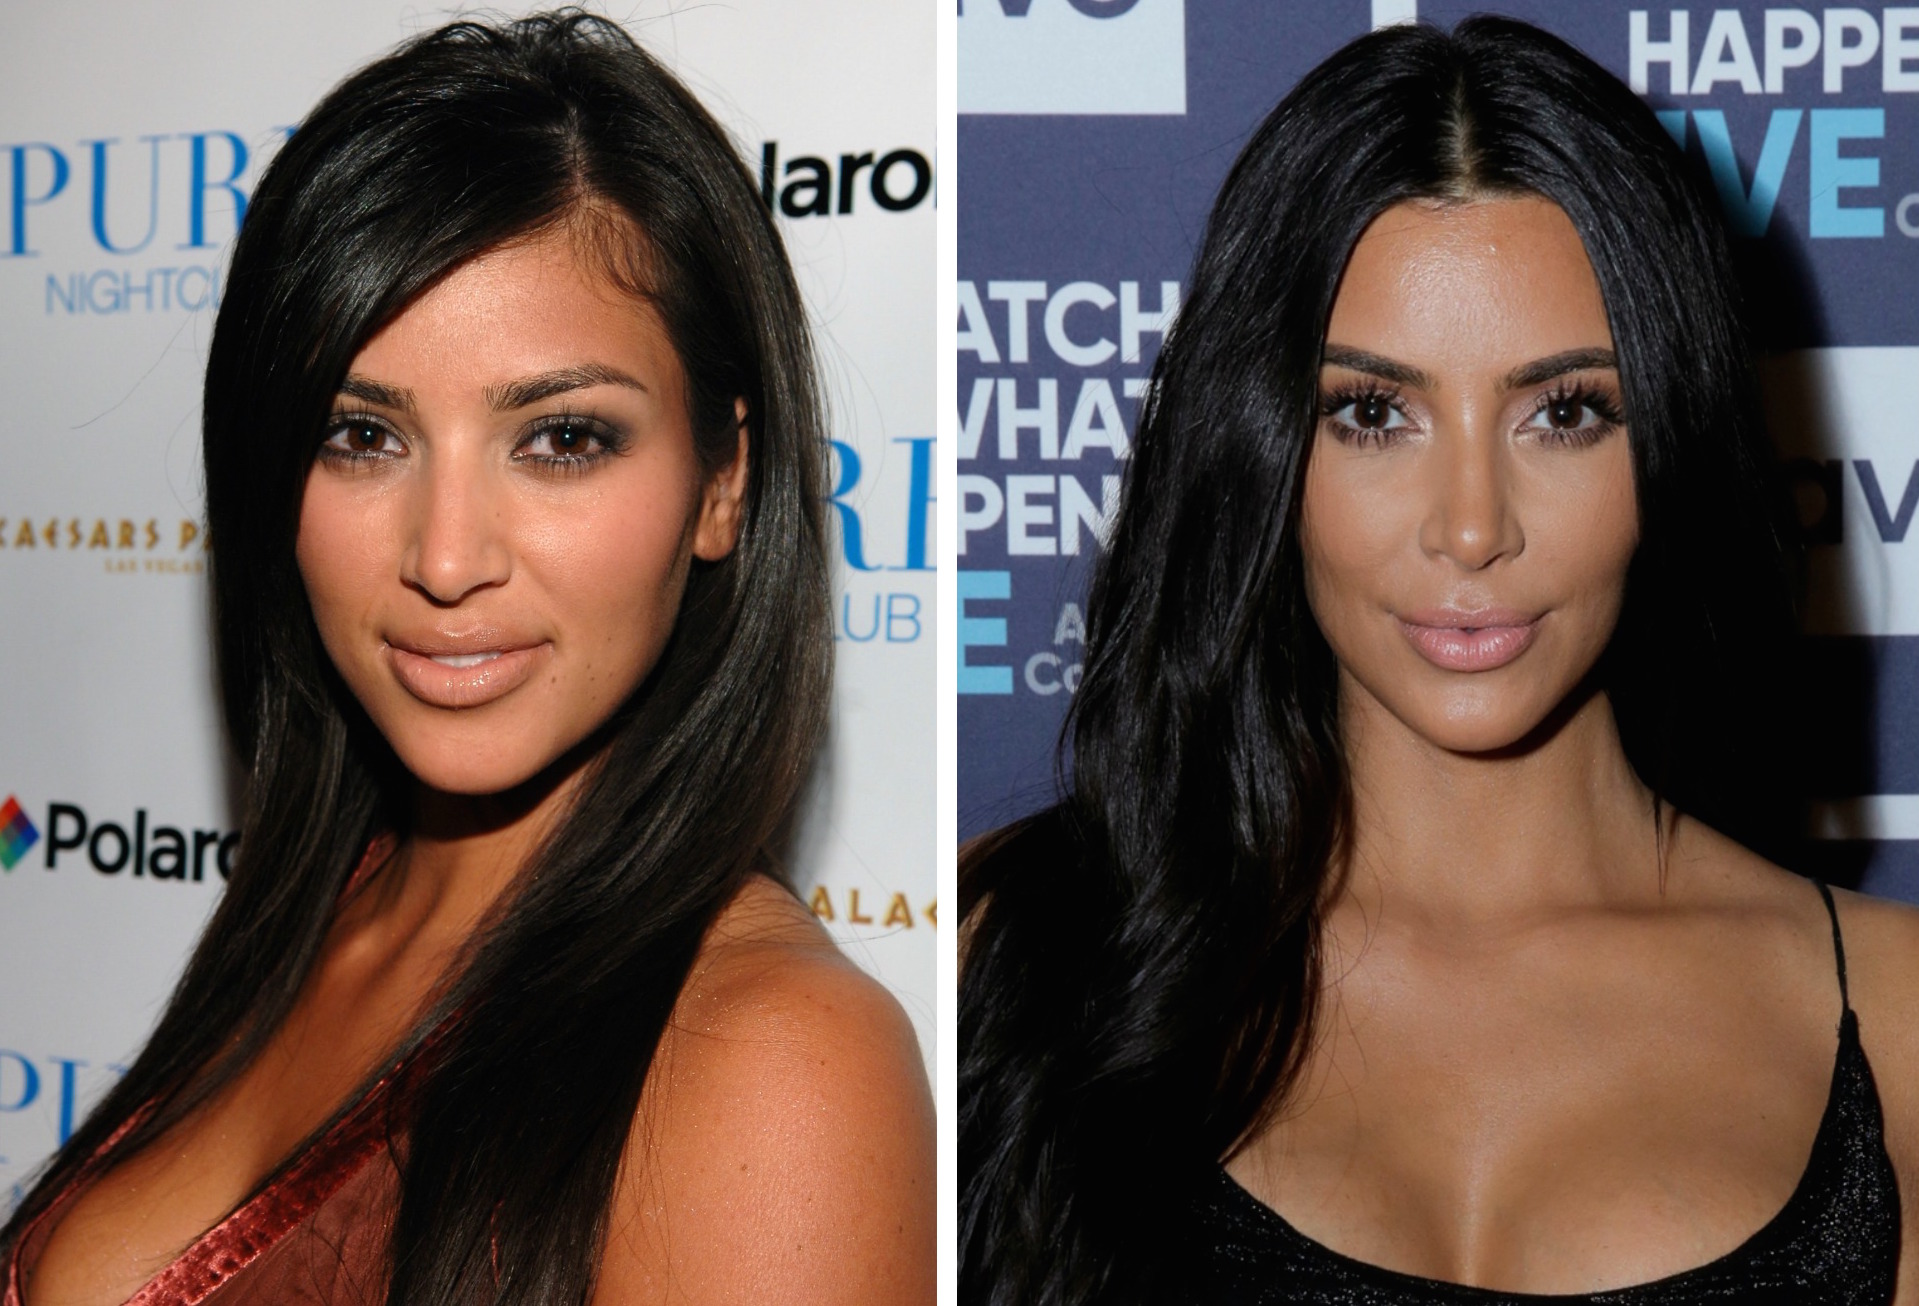 Kardashian Sisters: Who's Gotten the Most Surgery? - Life & Style